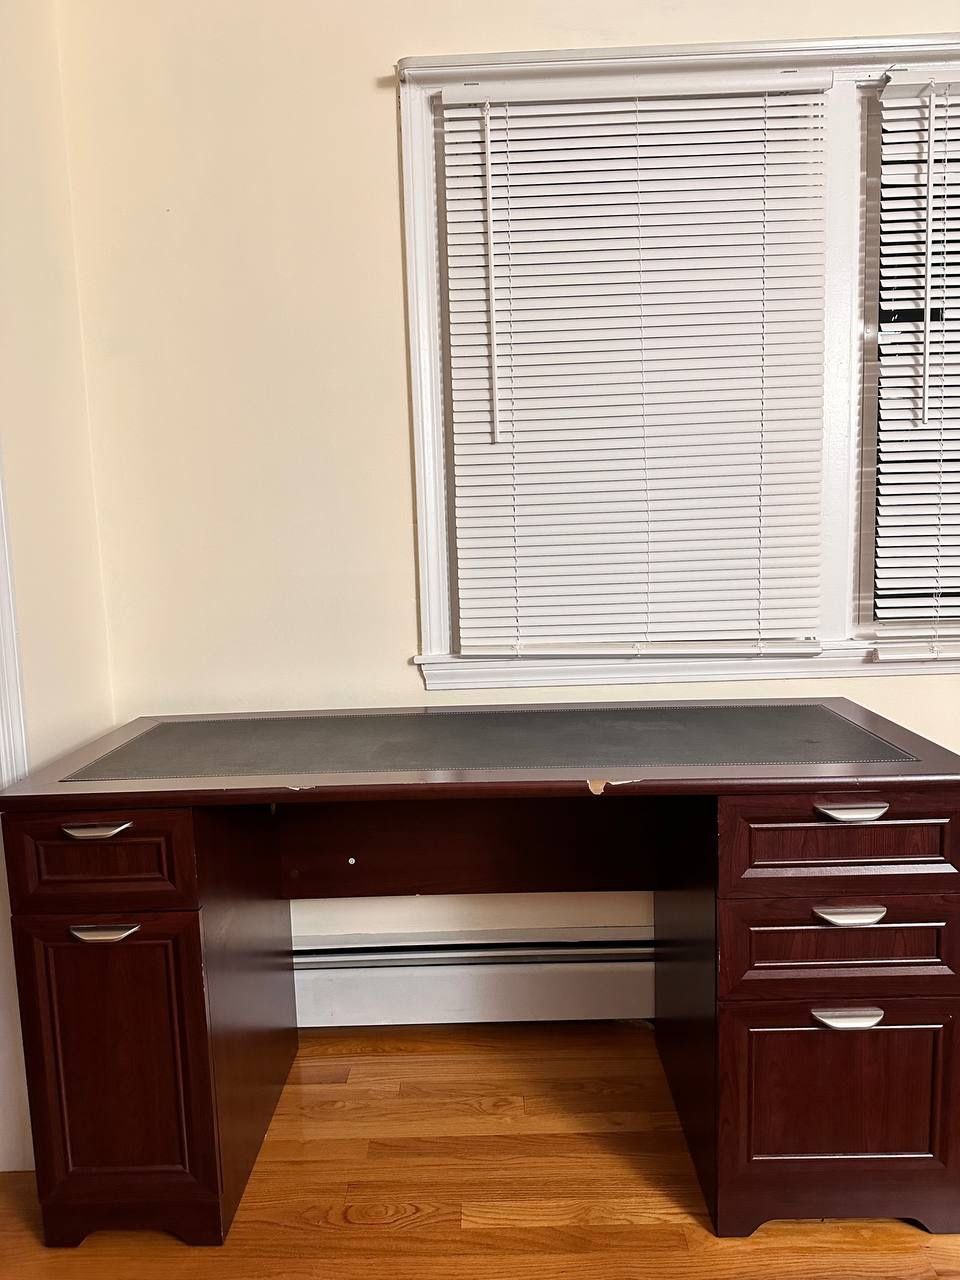 Leather Top Computer Desk With Drawers On Both Sides 